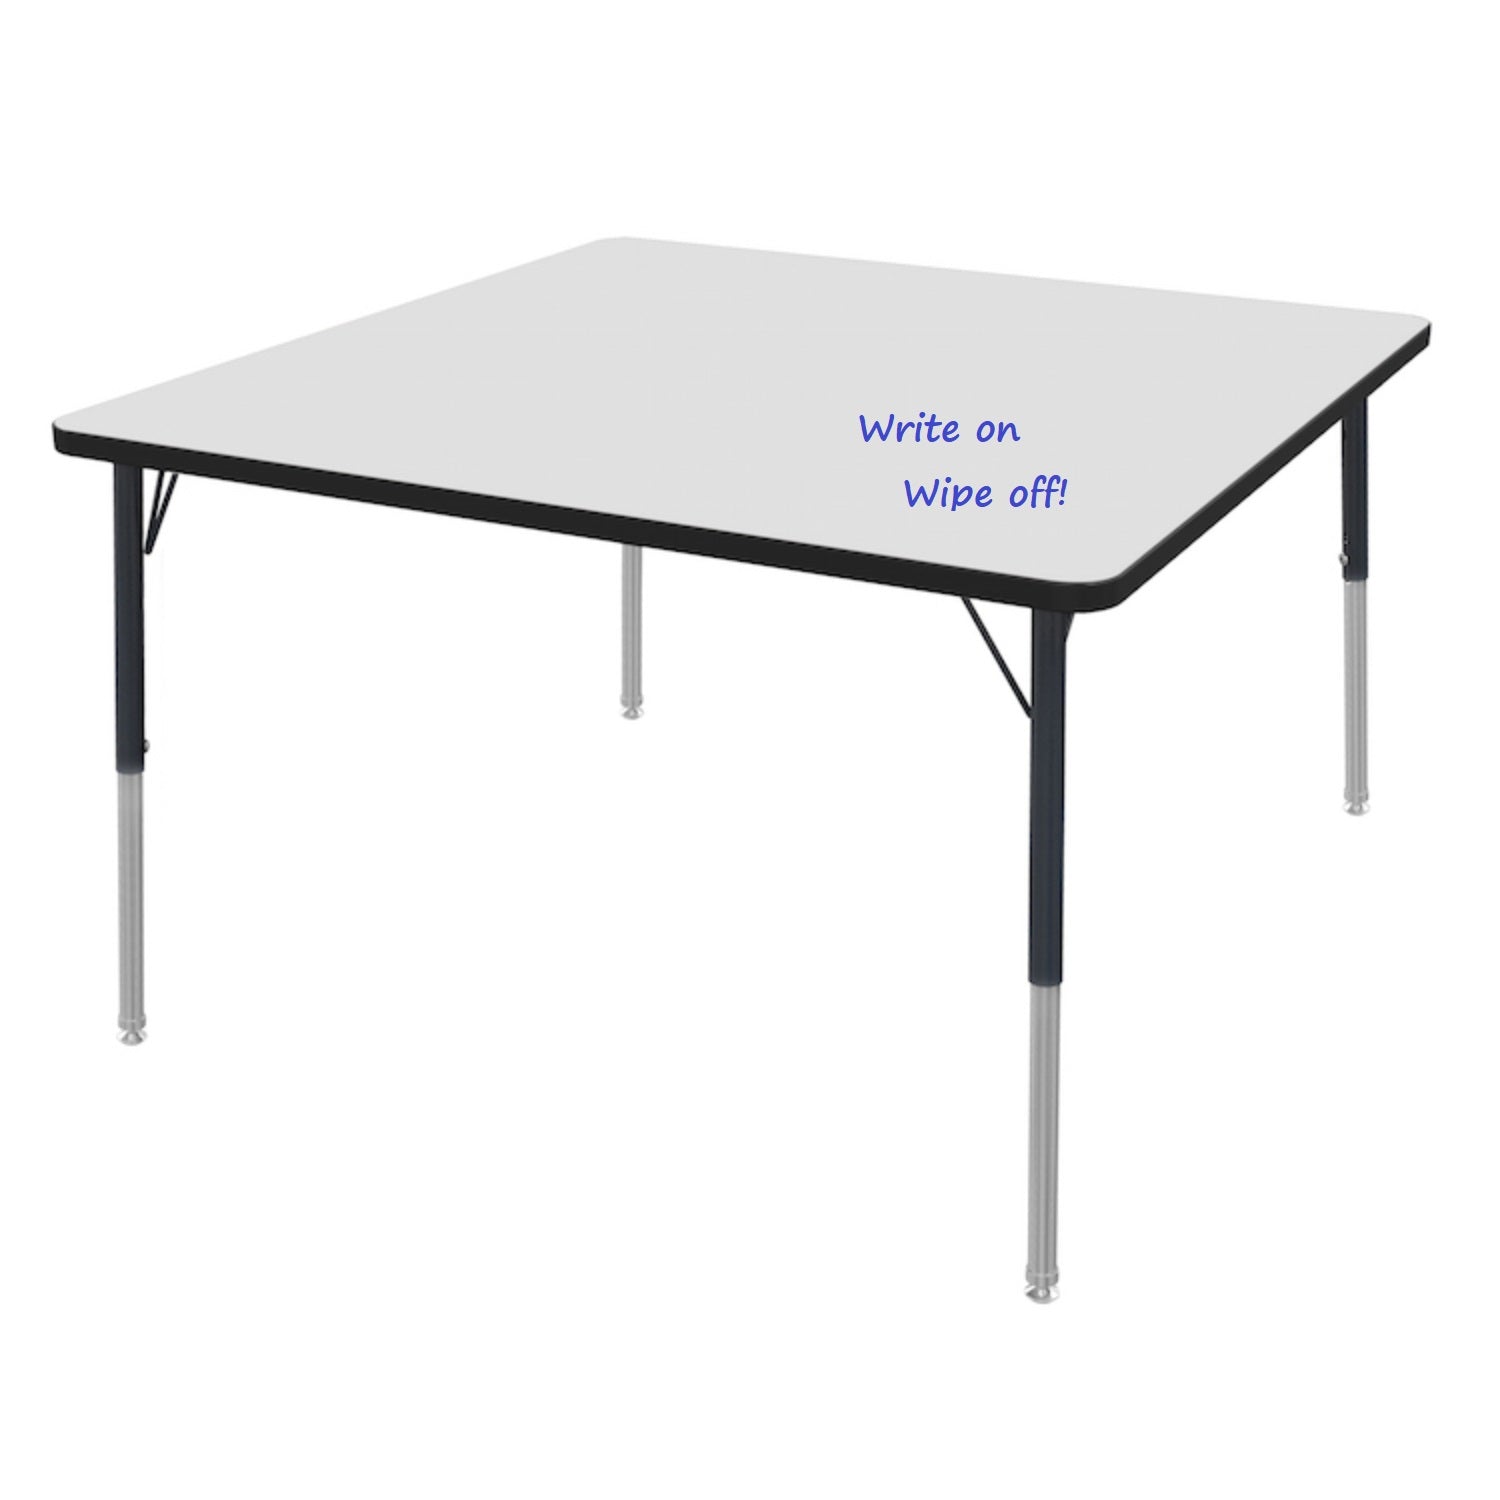 MG Series Adjustable Height Activity Table with White Dry Erase Markerboard Top, 36" x 36" Square